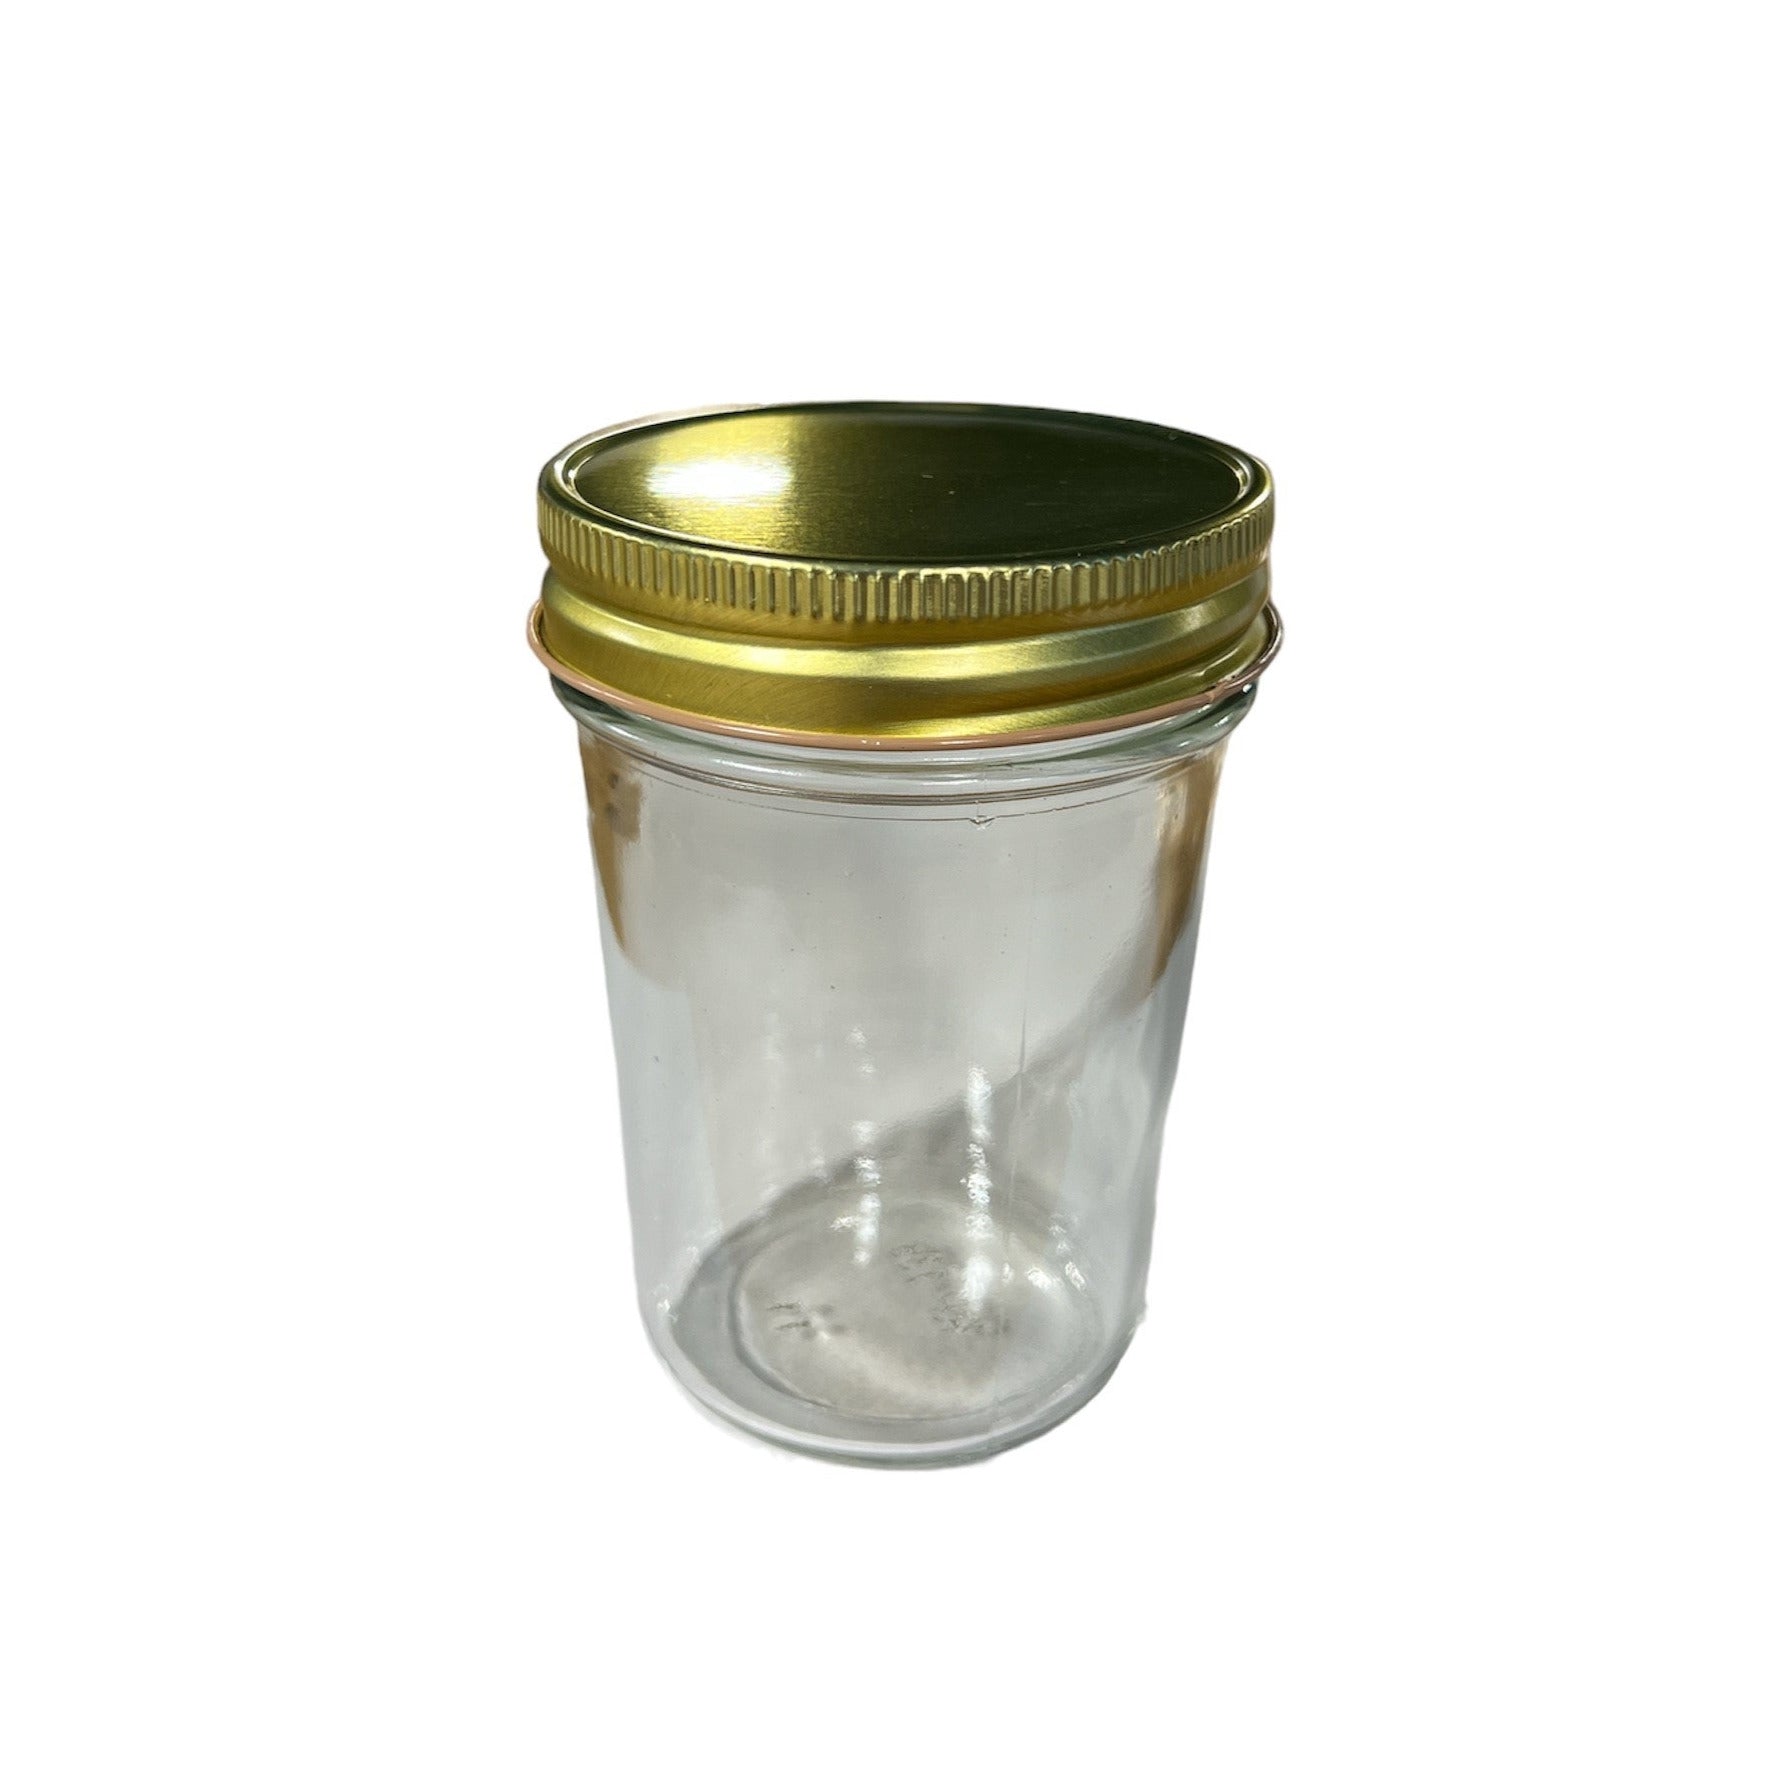 Canning Jelly Jar with Lid Myheavenlyscents